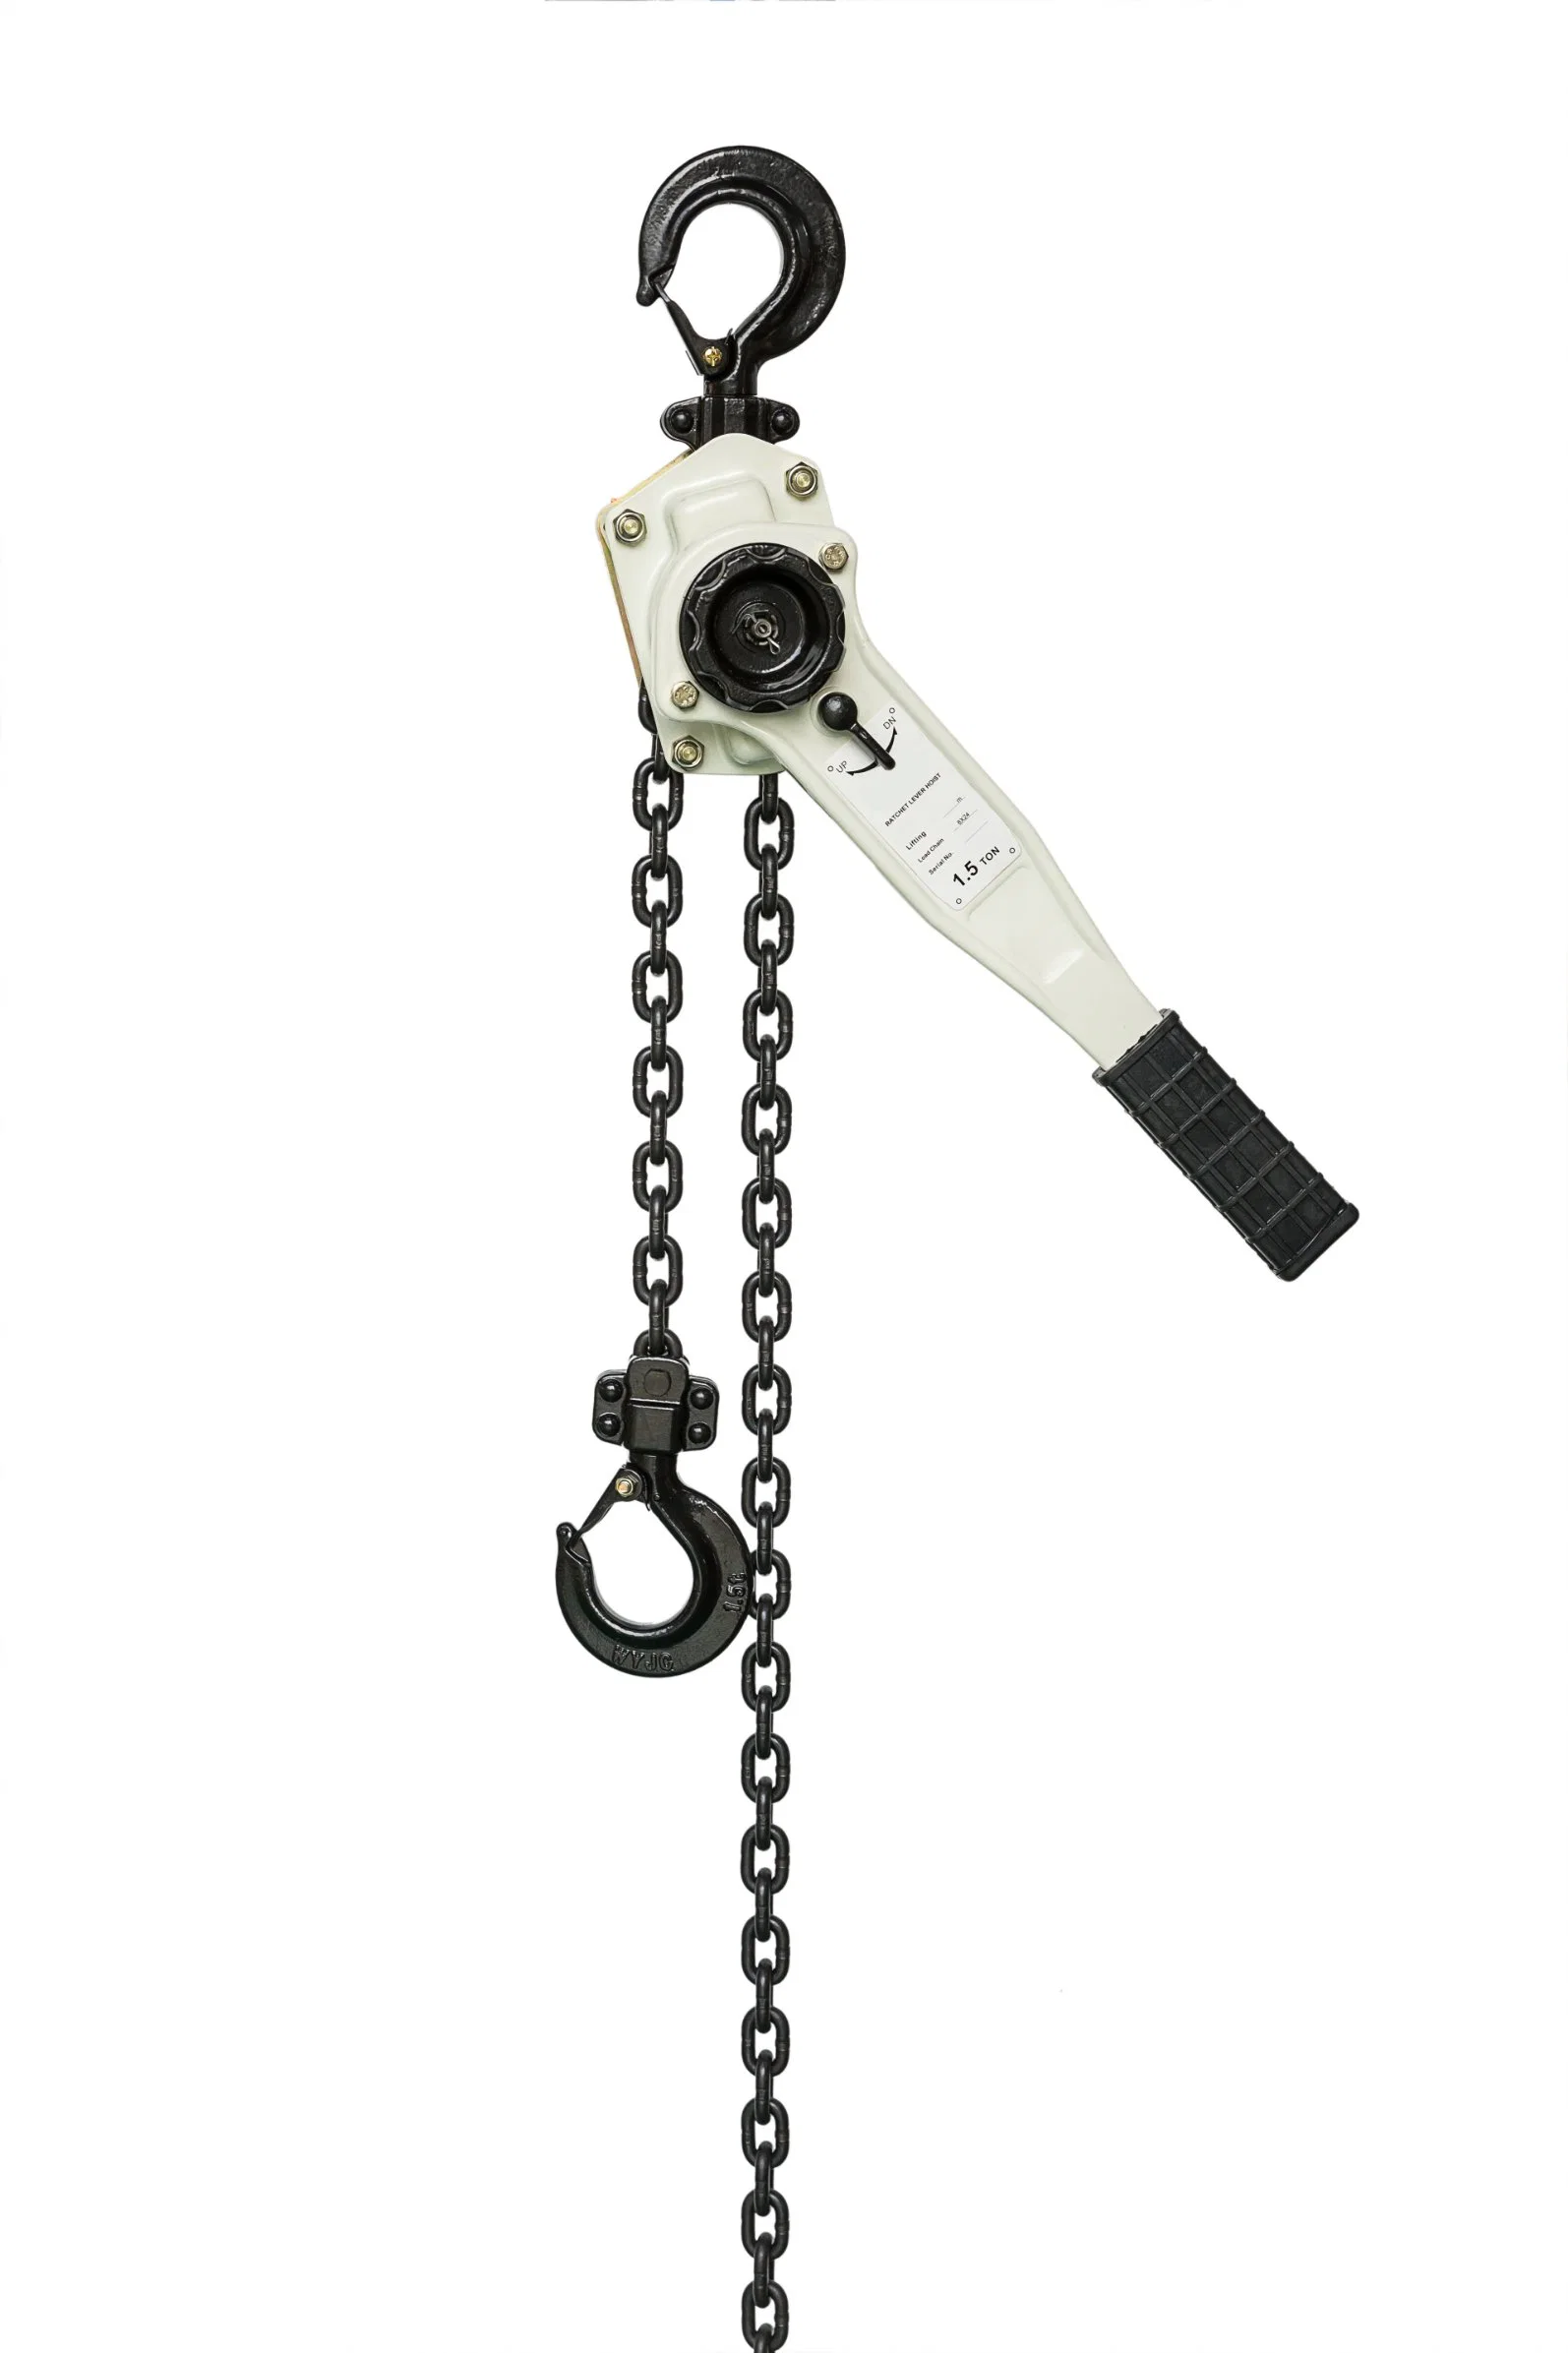 Hsh-E Type 1.5 Ton 5 FT Construction Lever Hoist with CE and GS Certification